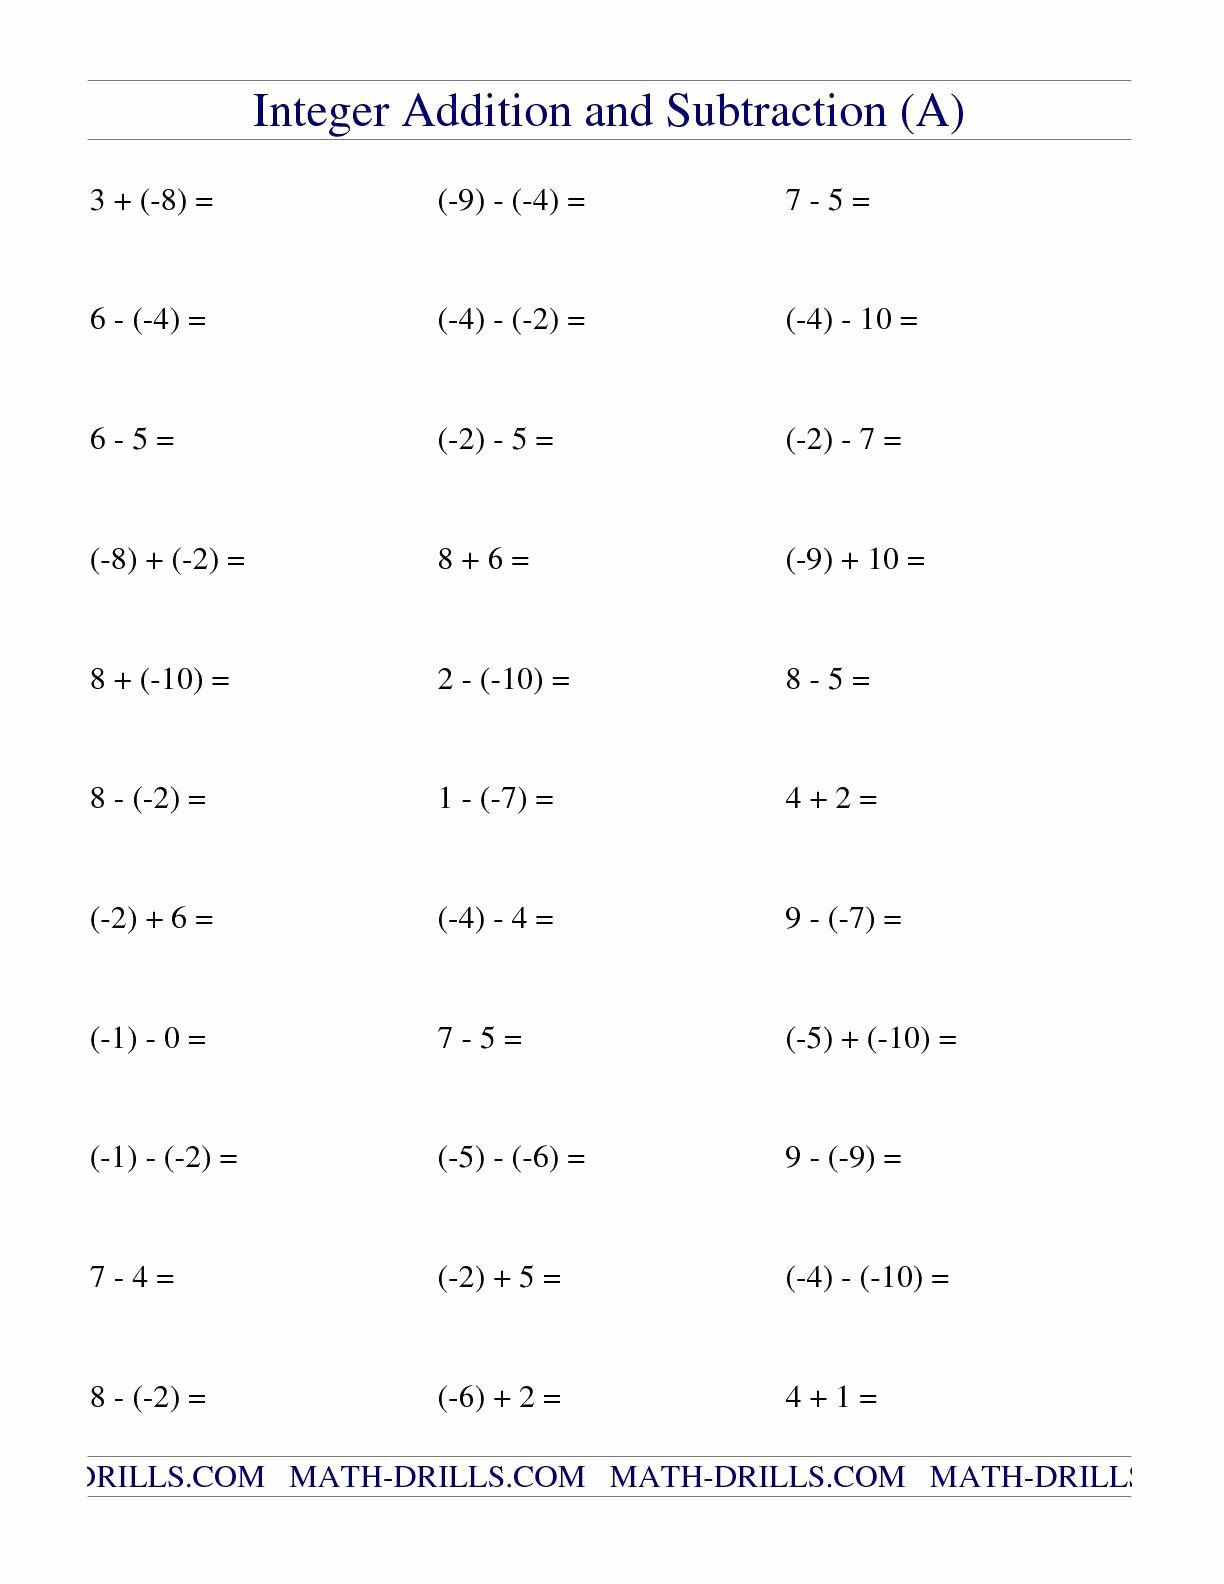 Subtracting Integers Worksheet Pdf Inspirational the Integer Addition and Subtraction Range 10 to 10 A